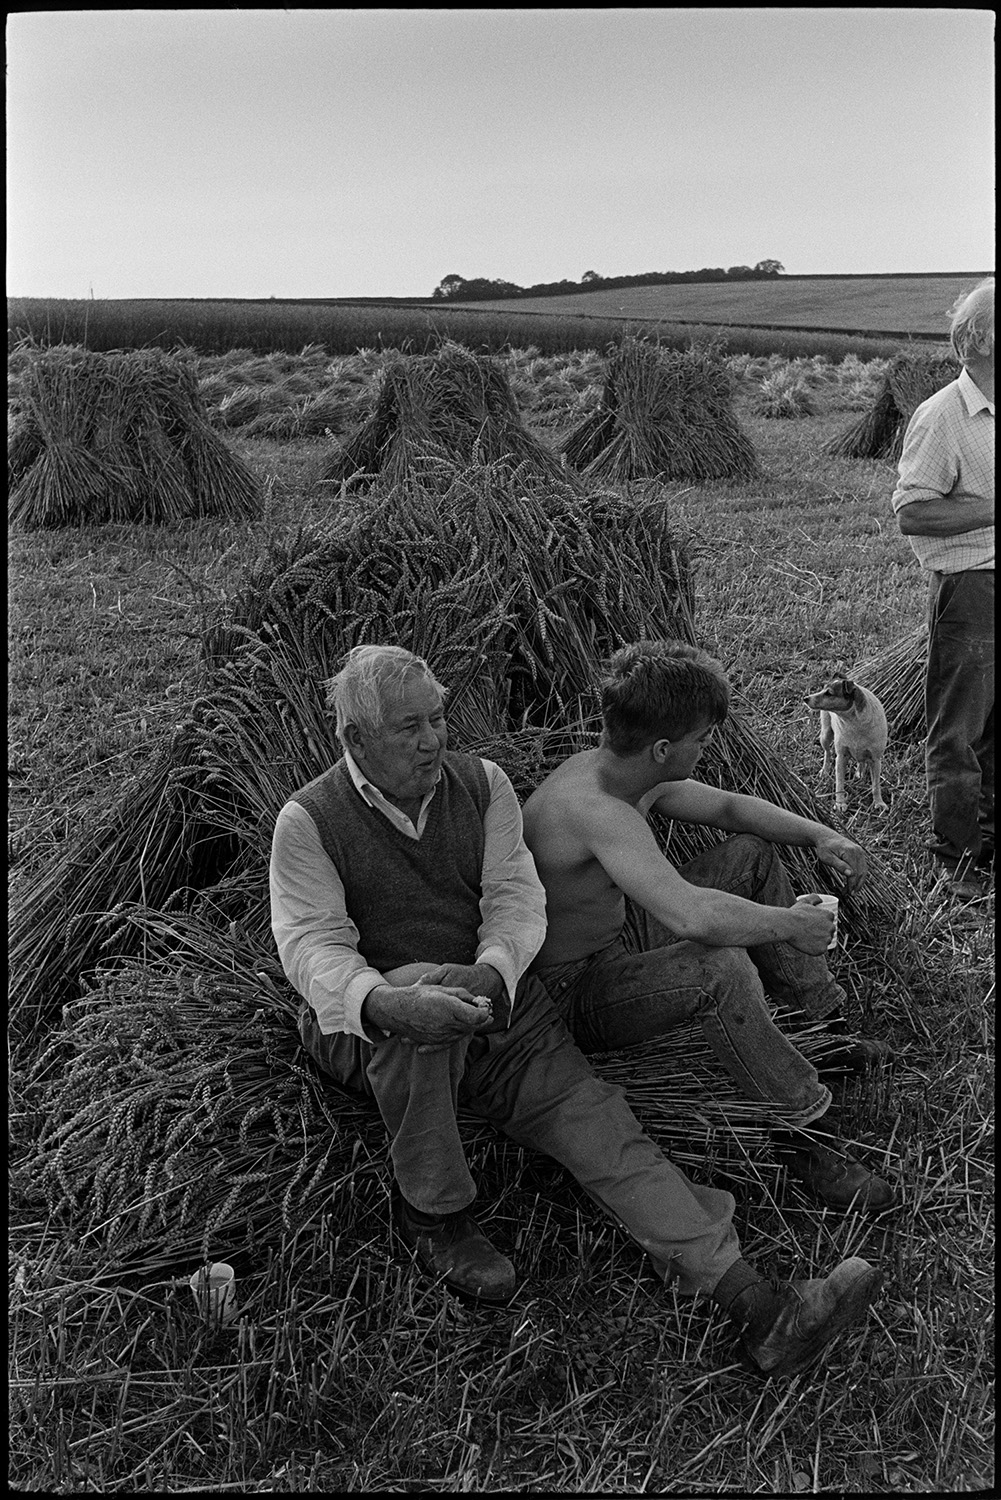 Harvesters tea break, leaning on car, woman, farmer's wife pouring from kettle, dog. 
[An older man and a young man, possibly from the Down family, sat against a stook of corn drinking tea, in a field at Spittle Farm, Chulmleigh. Other corn stooks can be seen in the background.]